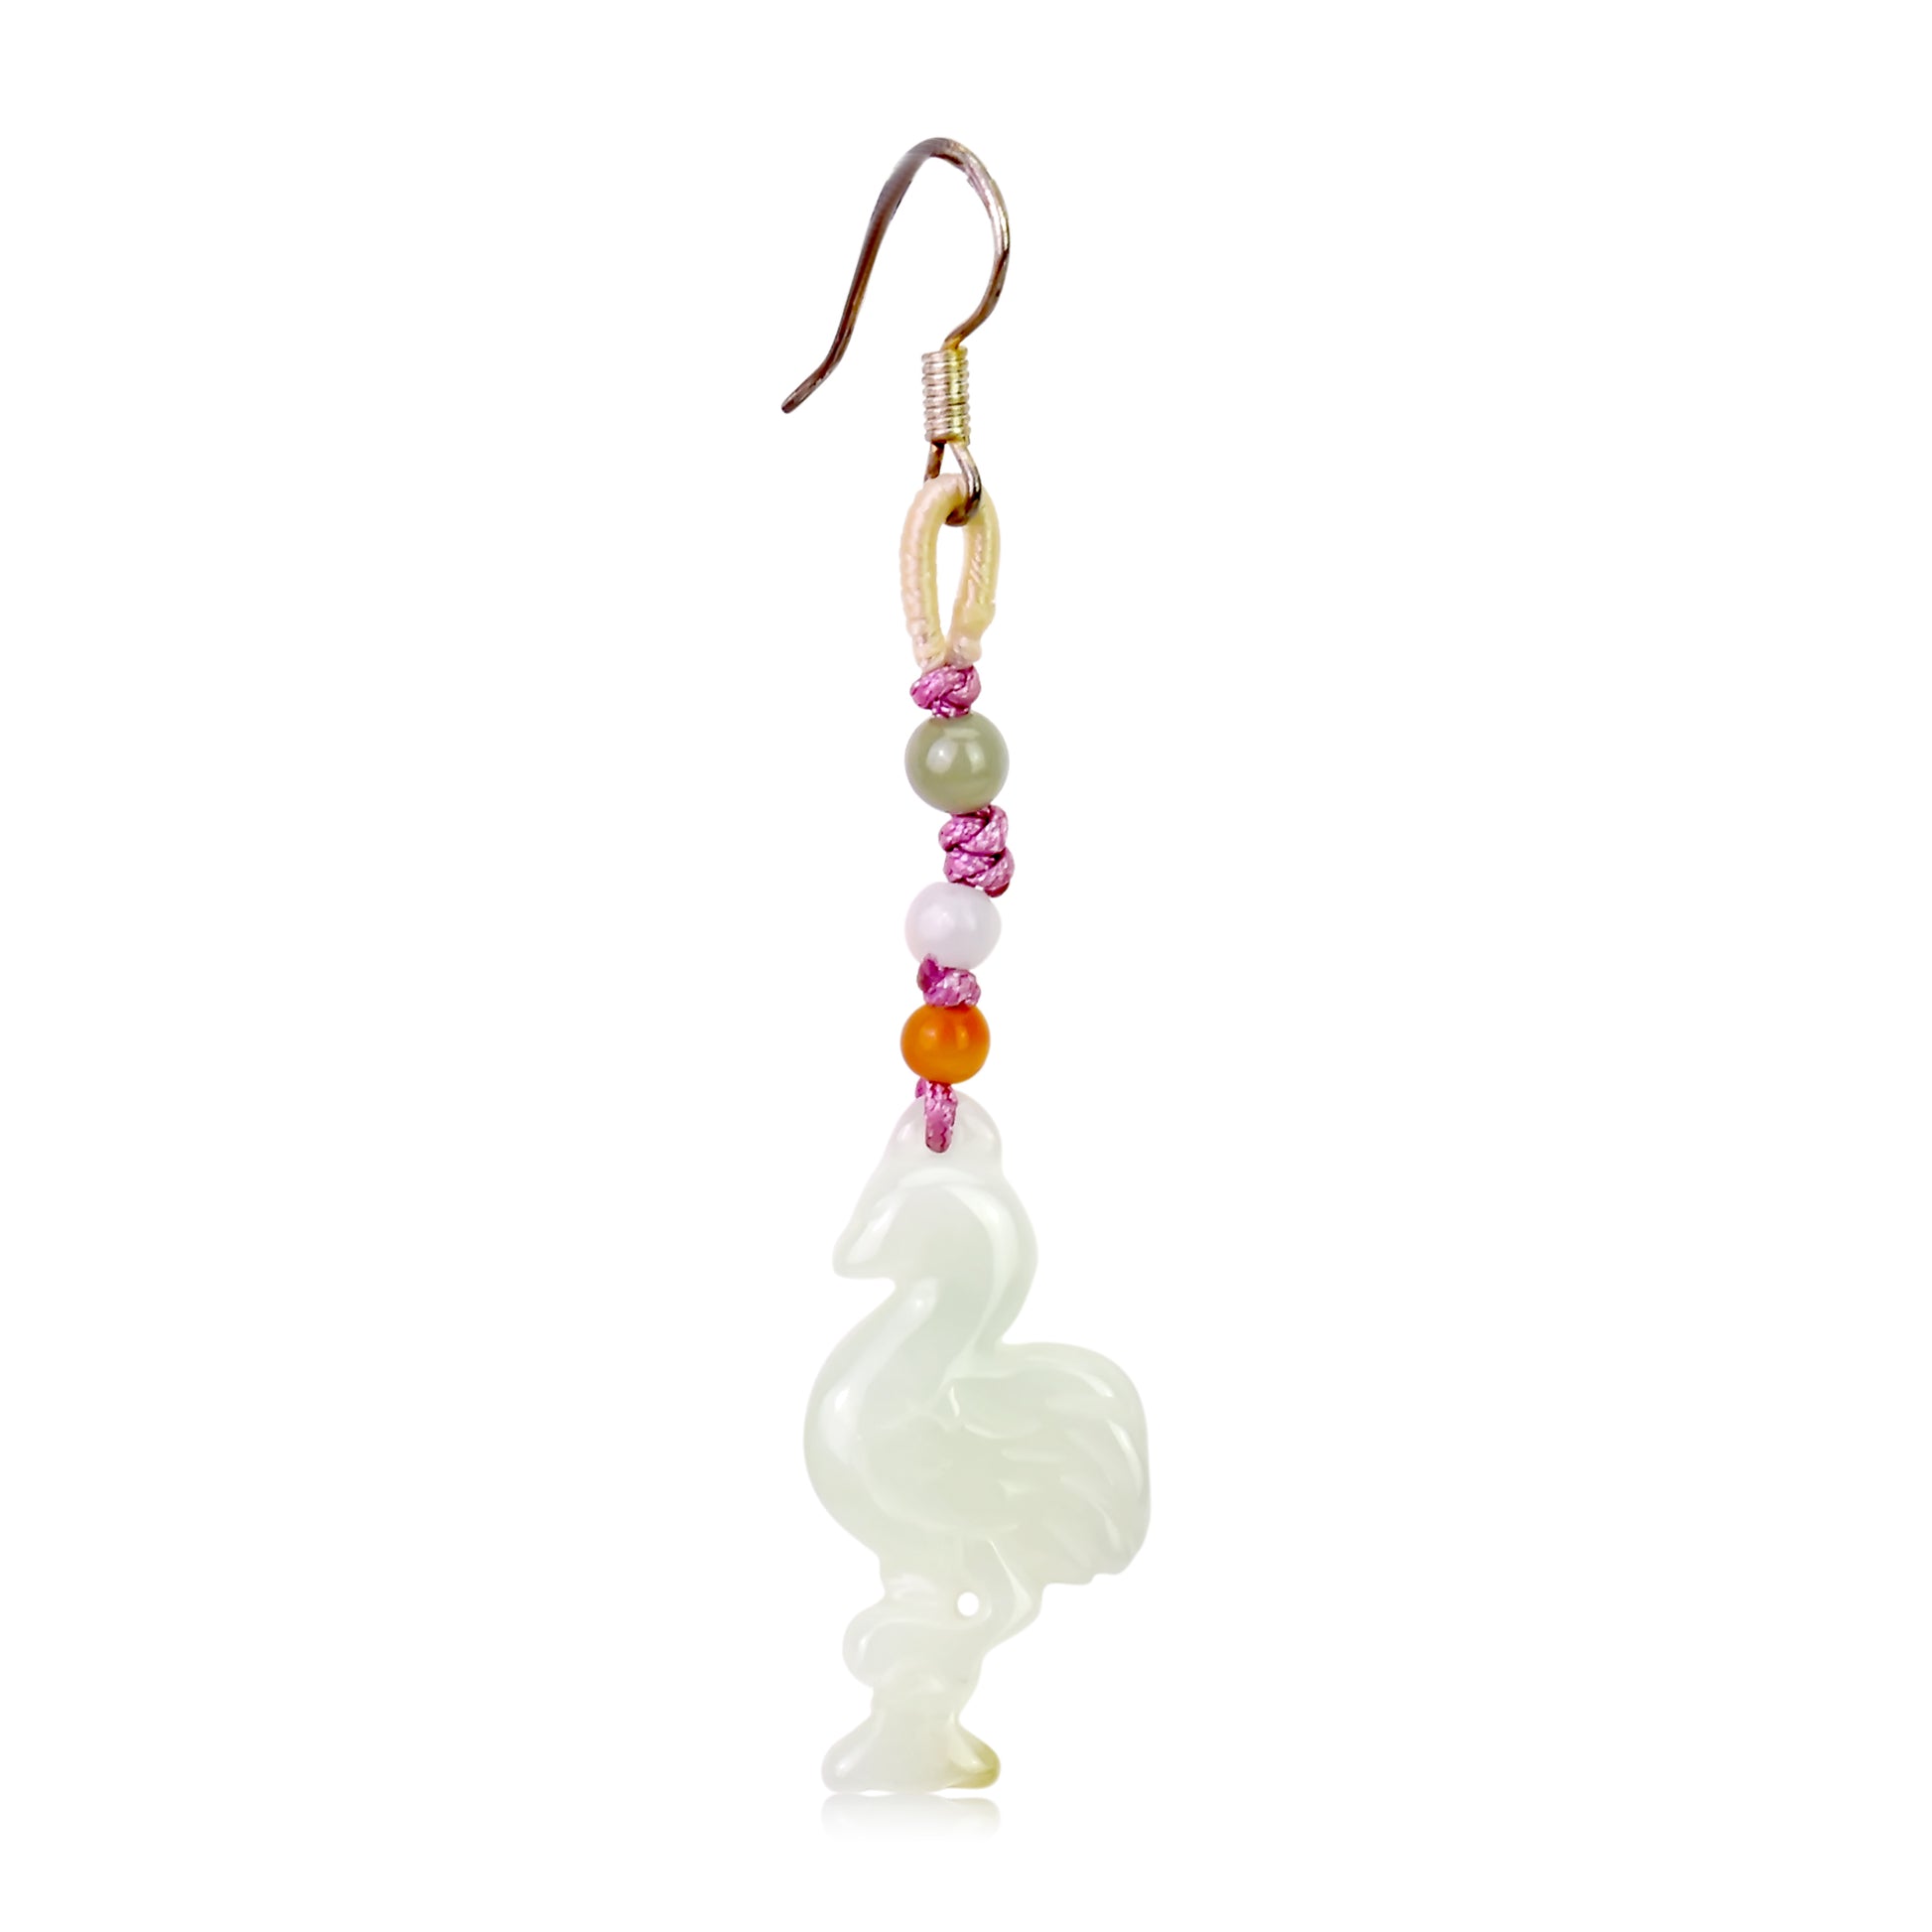 Feel Unique and Beautiful with Flamingo Handmade Jade Earrings made with Lavender Cord